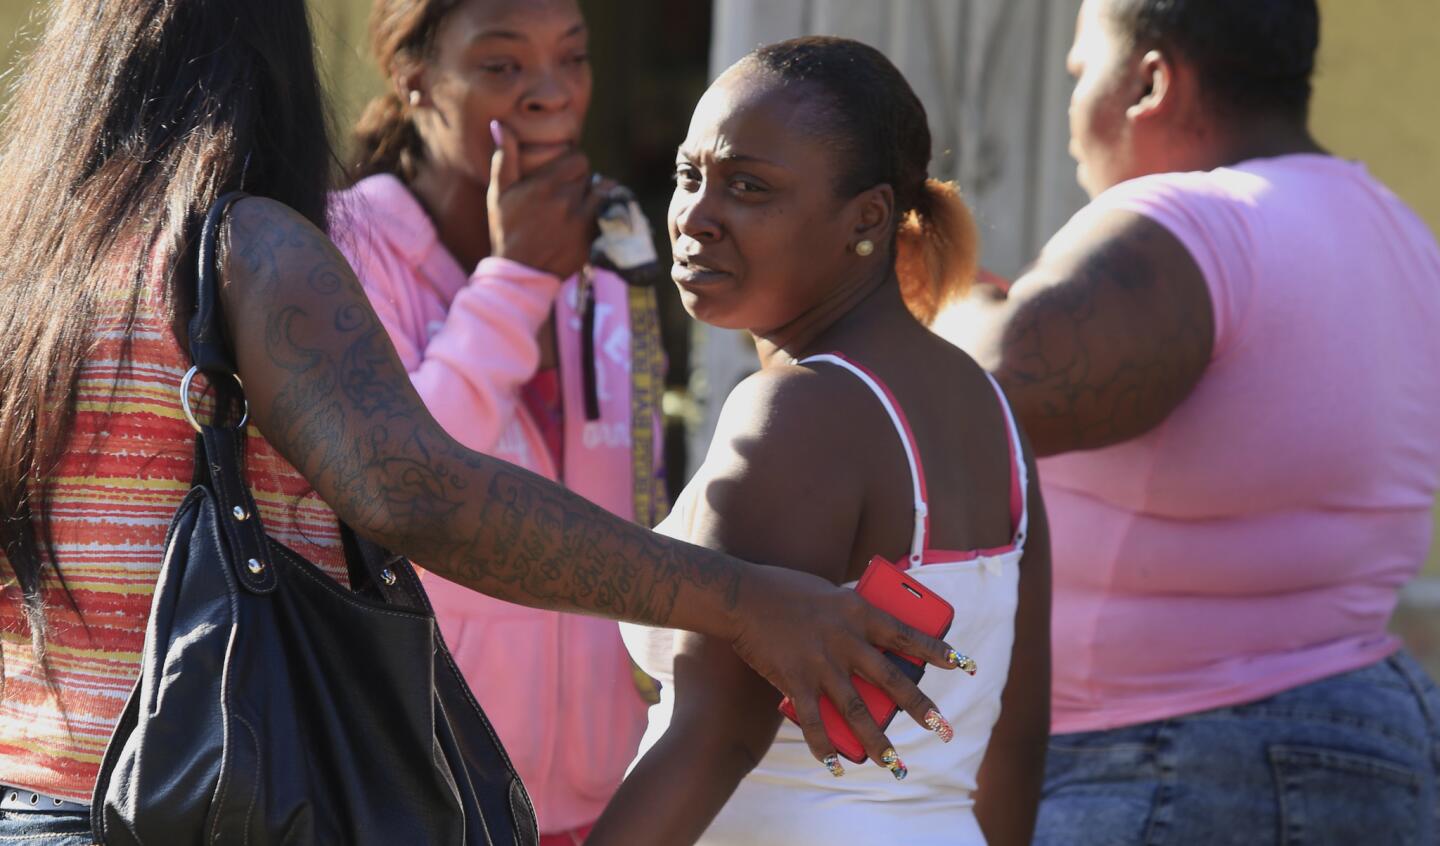 Danisha Mitchell, center, is surrounded by friends and family outside her South Los Angeles home a day after her son, 7-year-old Jamarion Thomas, was run over and killed by an ice-cream truck.